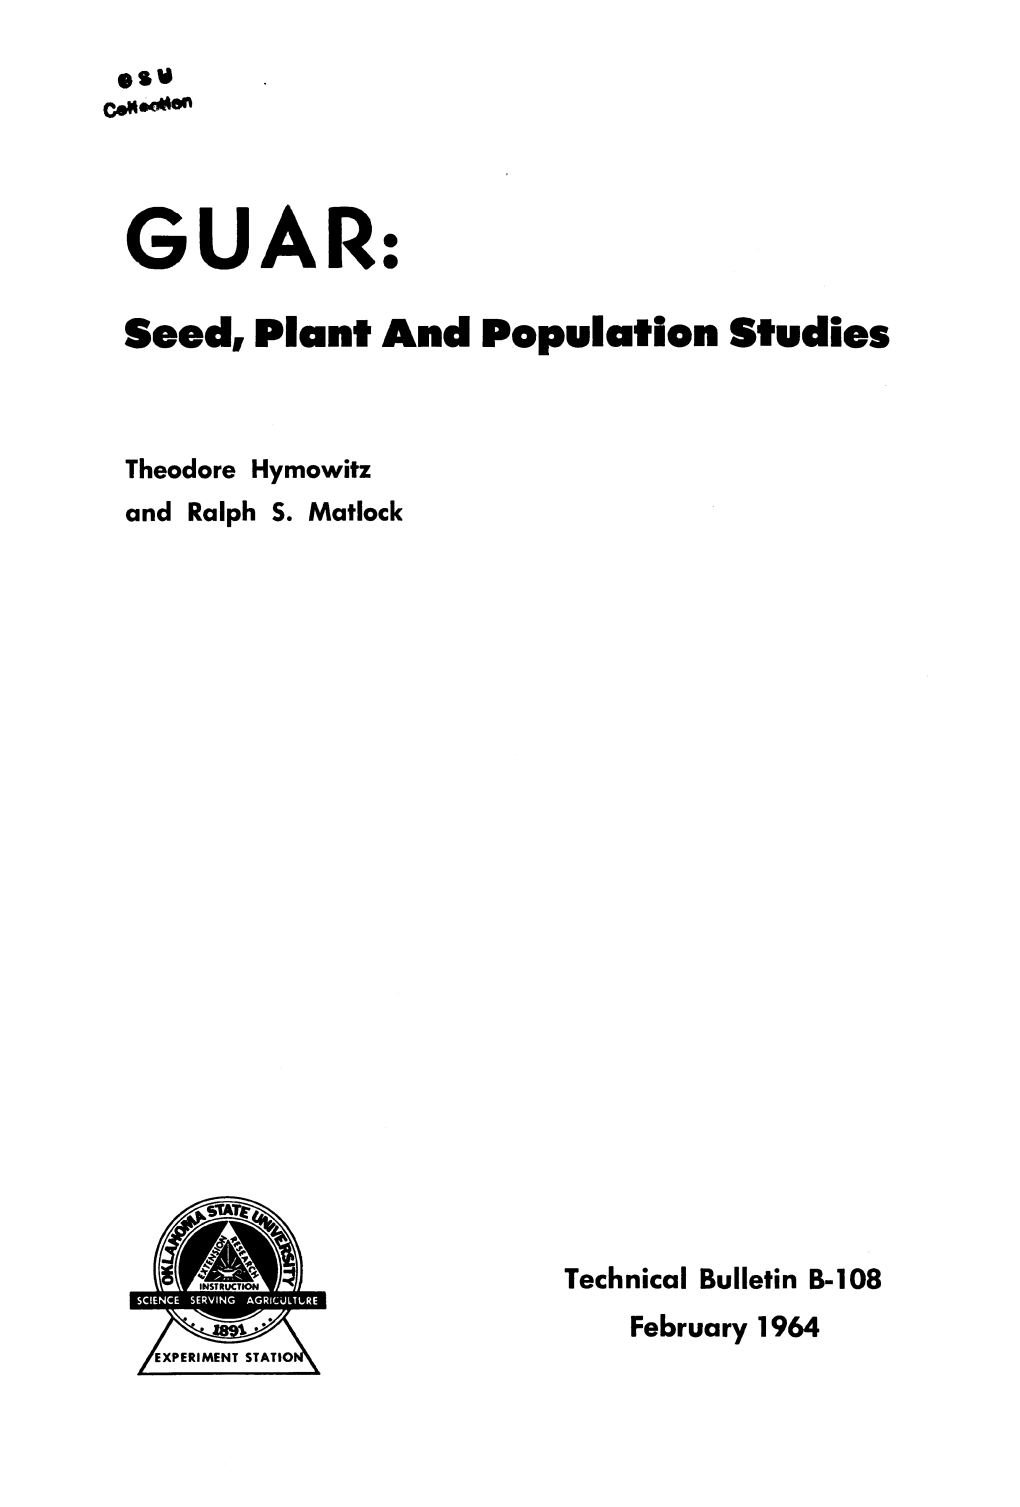 Seed, Plant and Population Studies